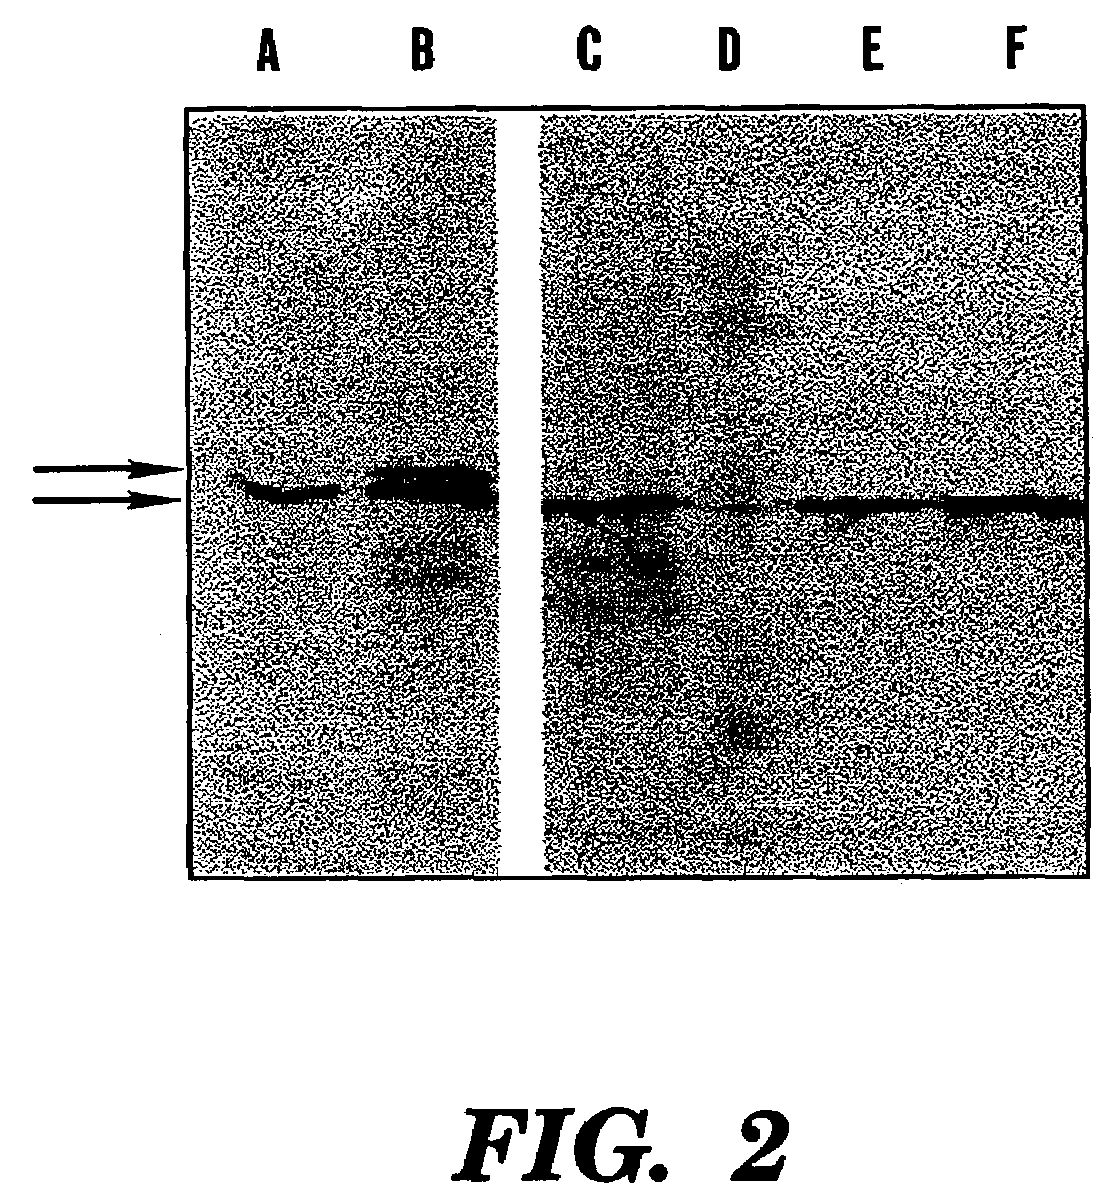 Hypersensitive response elicitor fragments eliciting a hypersensitive response and uses thereof